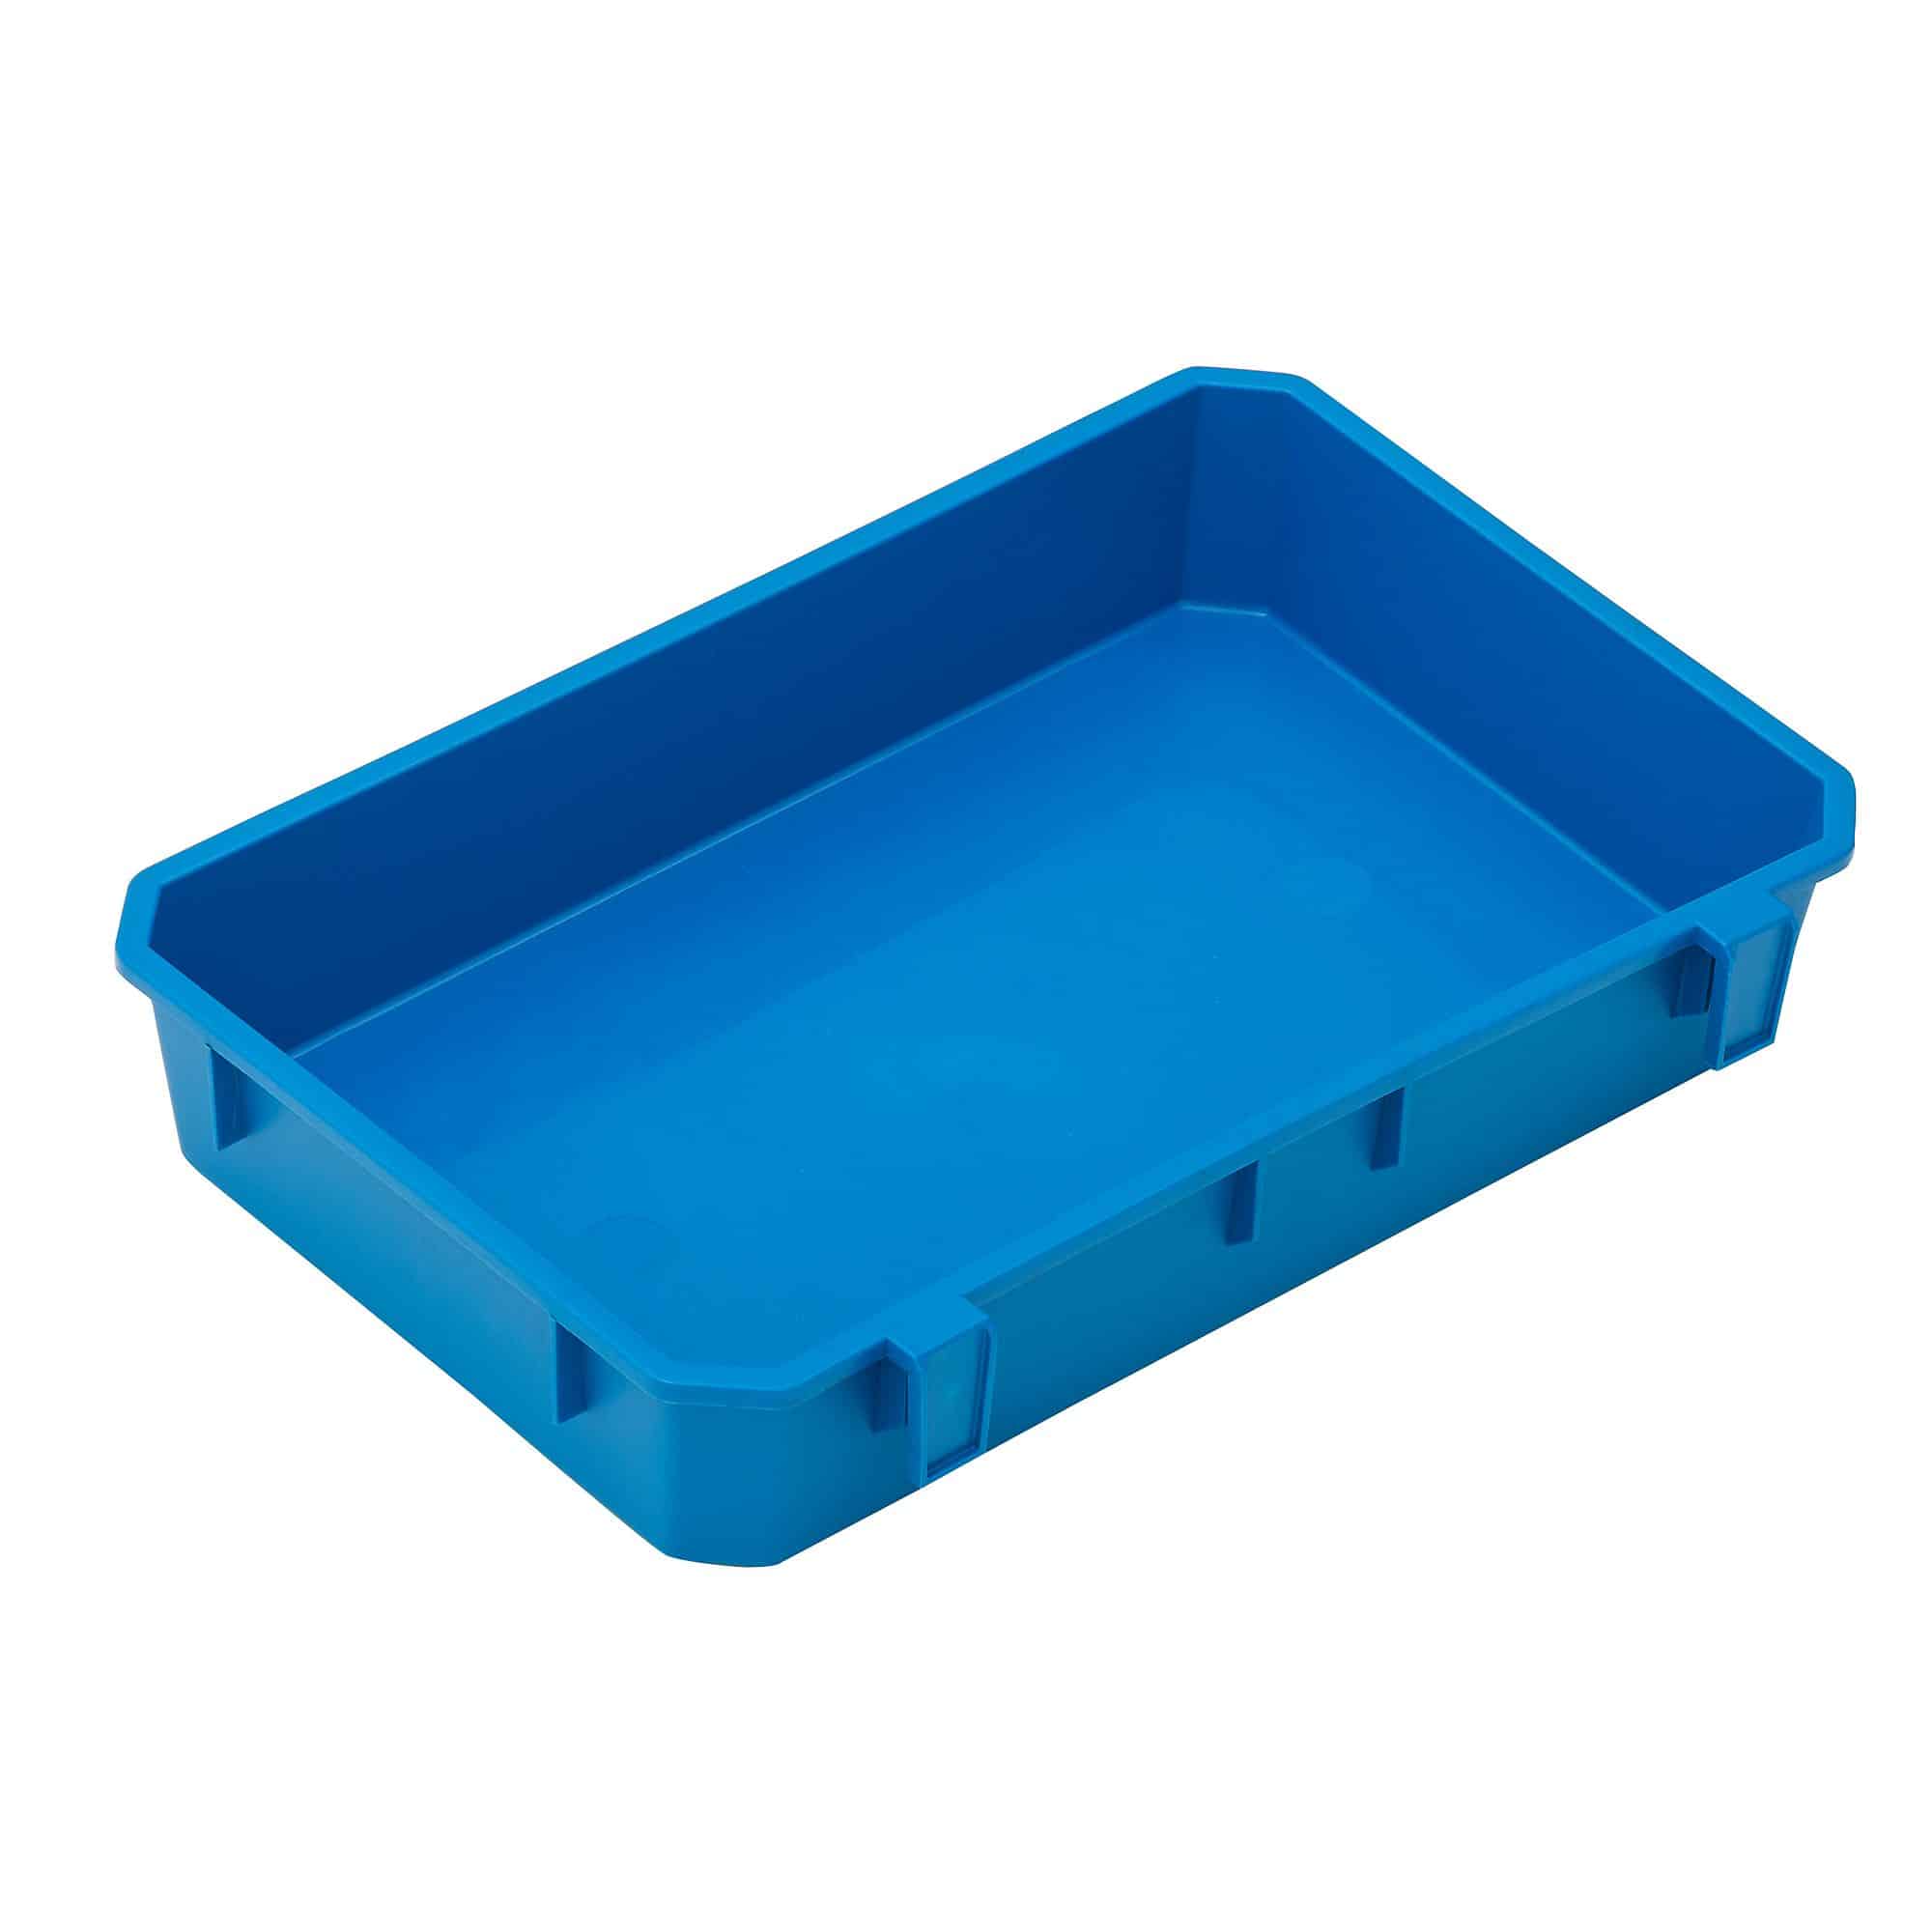 Shakespeare Boat Seatbox Side Tray - Blue